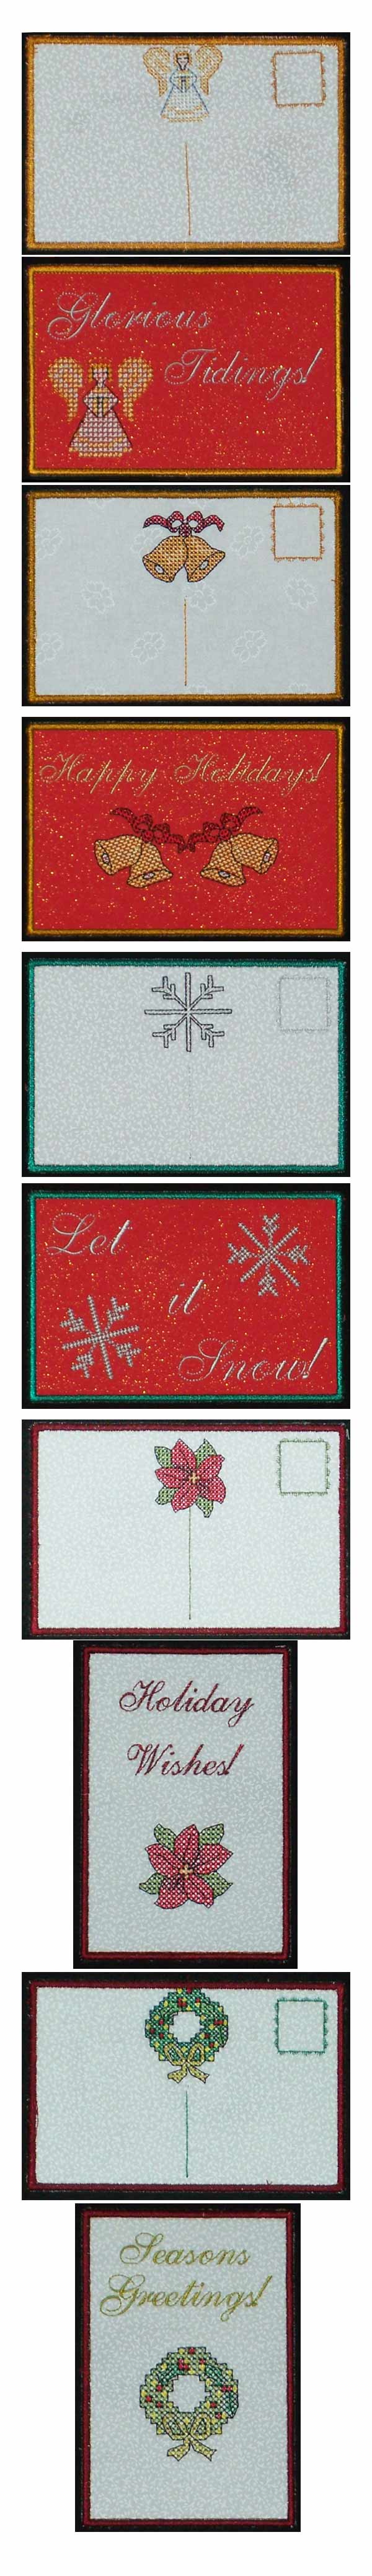 Holiday Post Cards Embroidery Machine Design Details